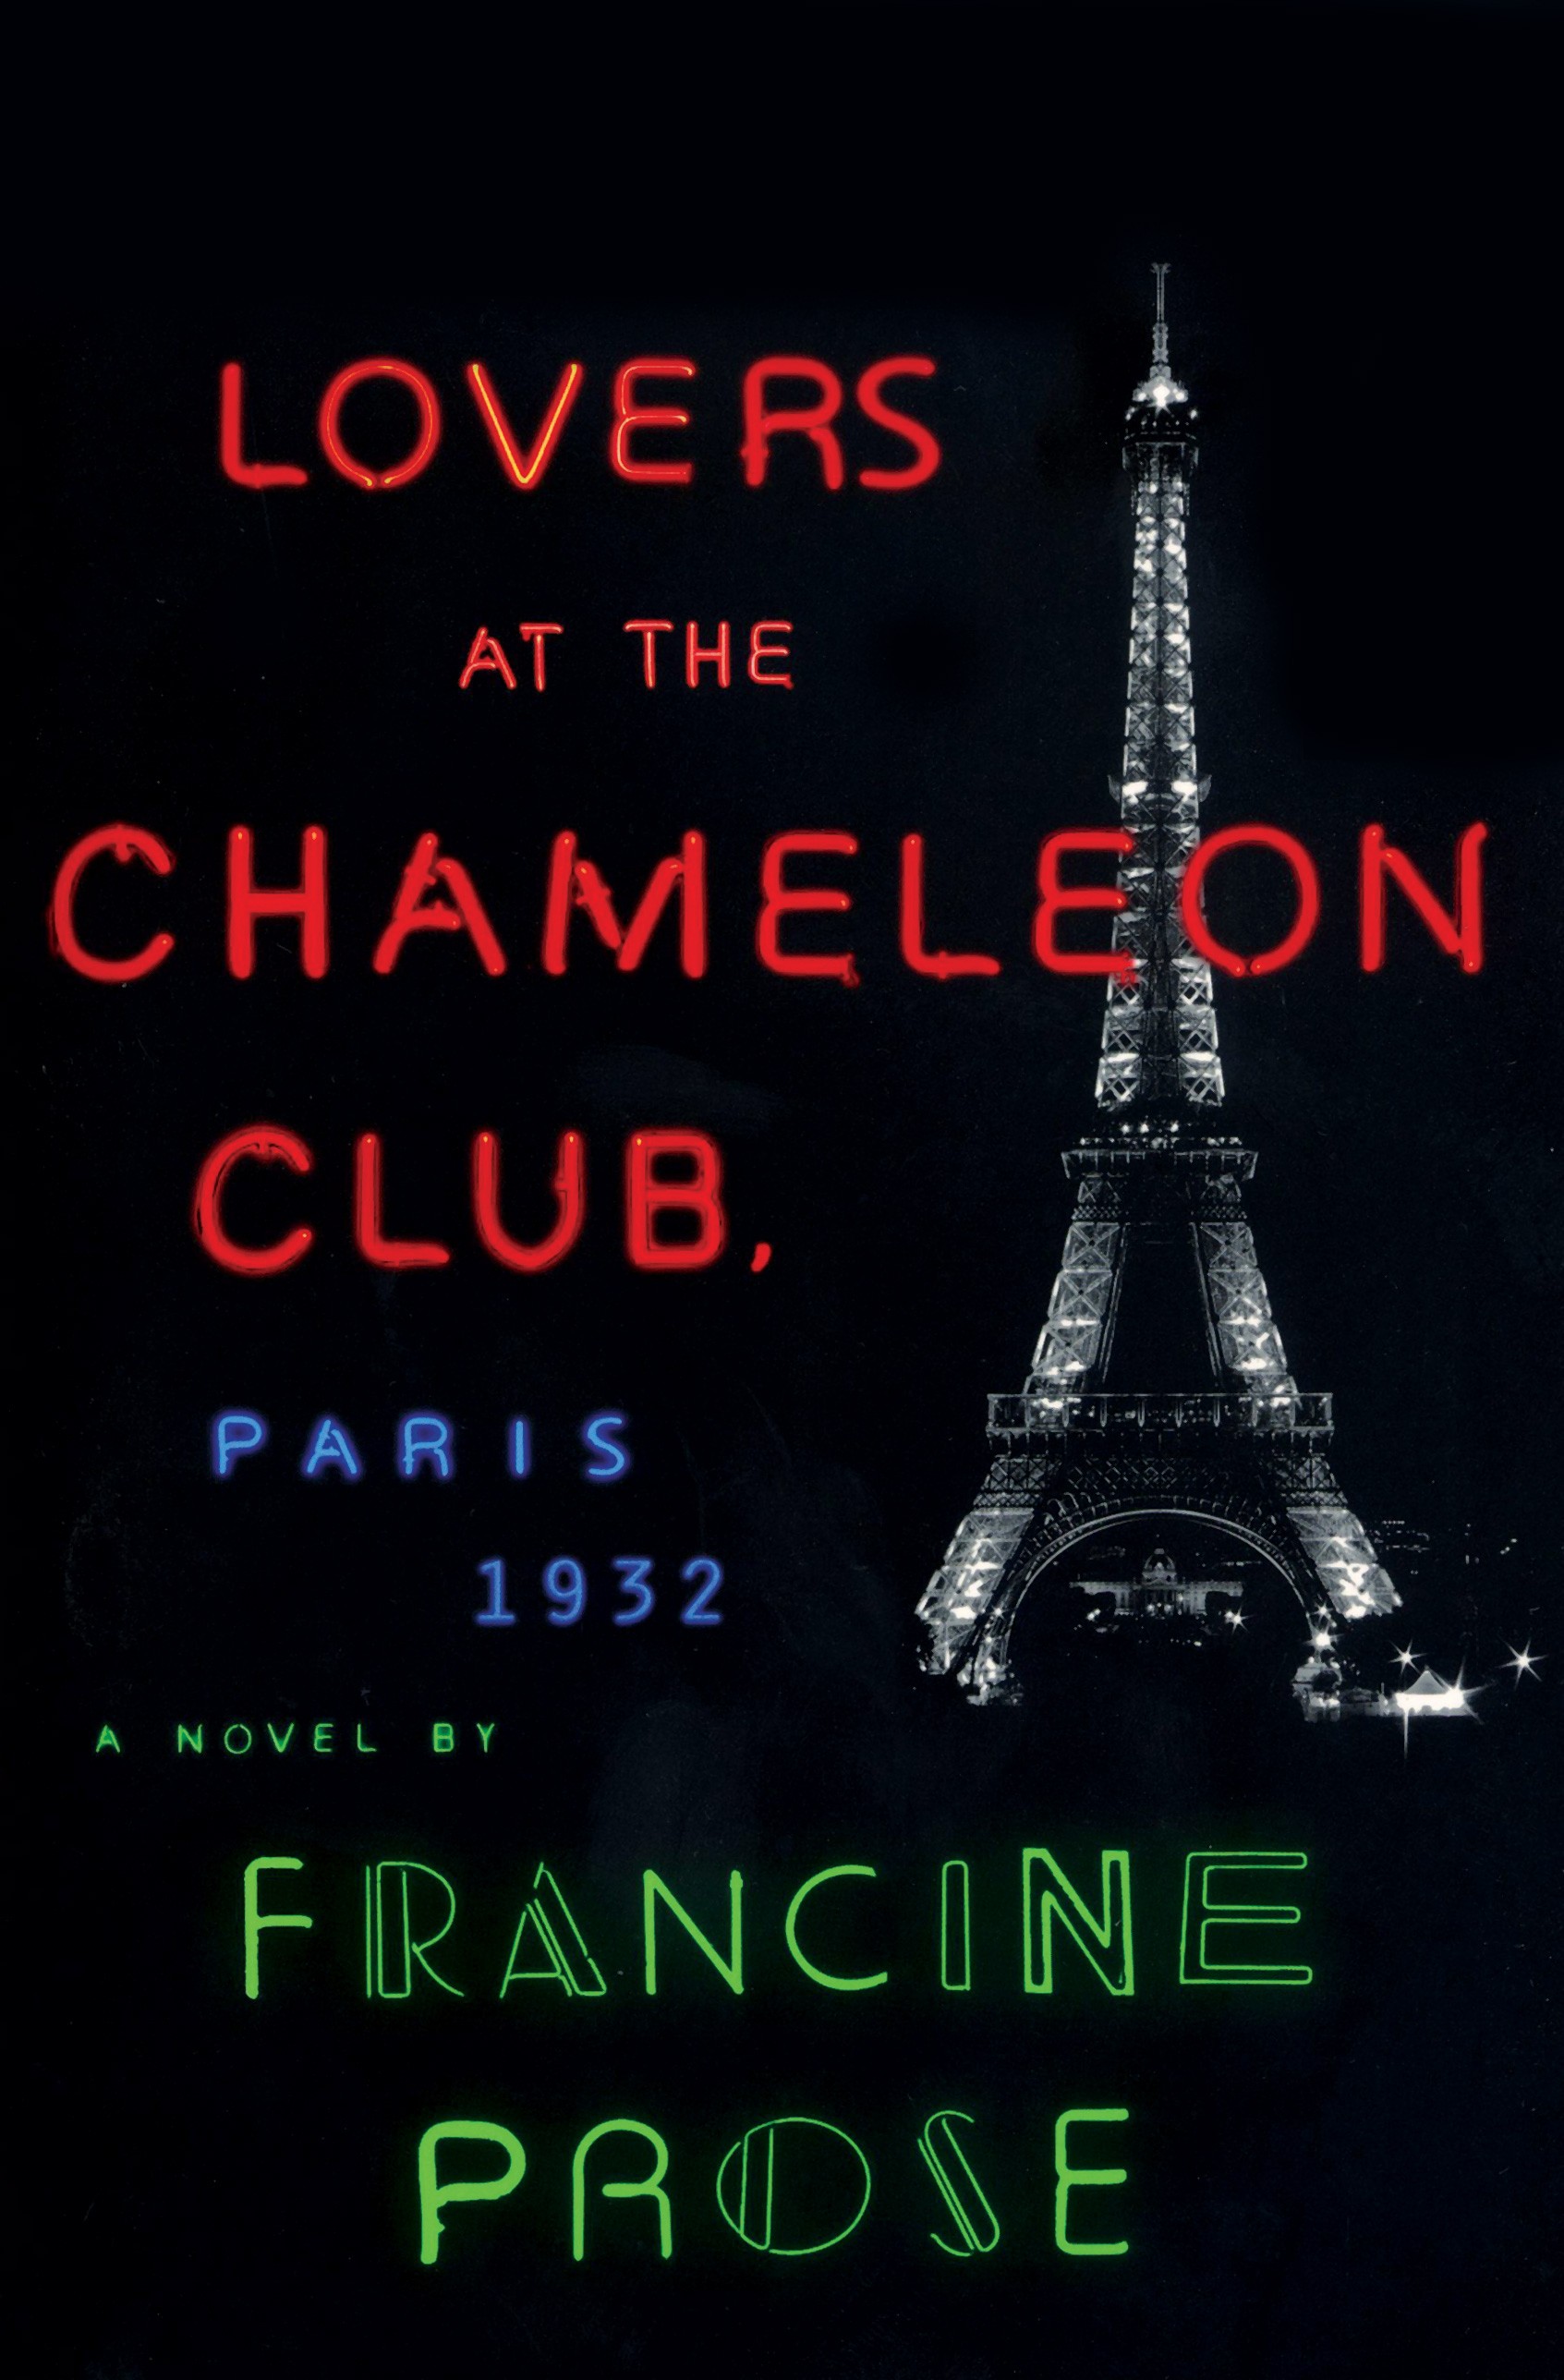 Book Review: Lovers at the Chameleon Club, Paris 1932